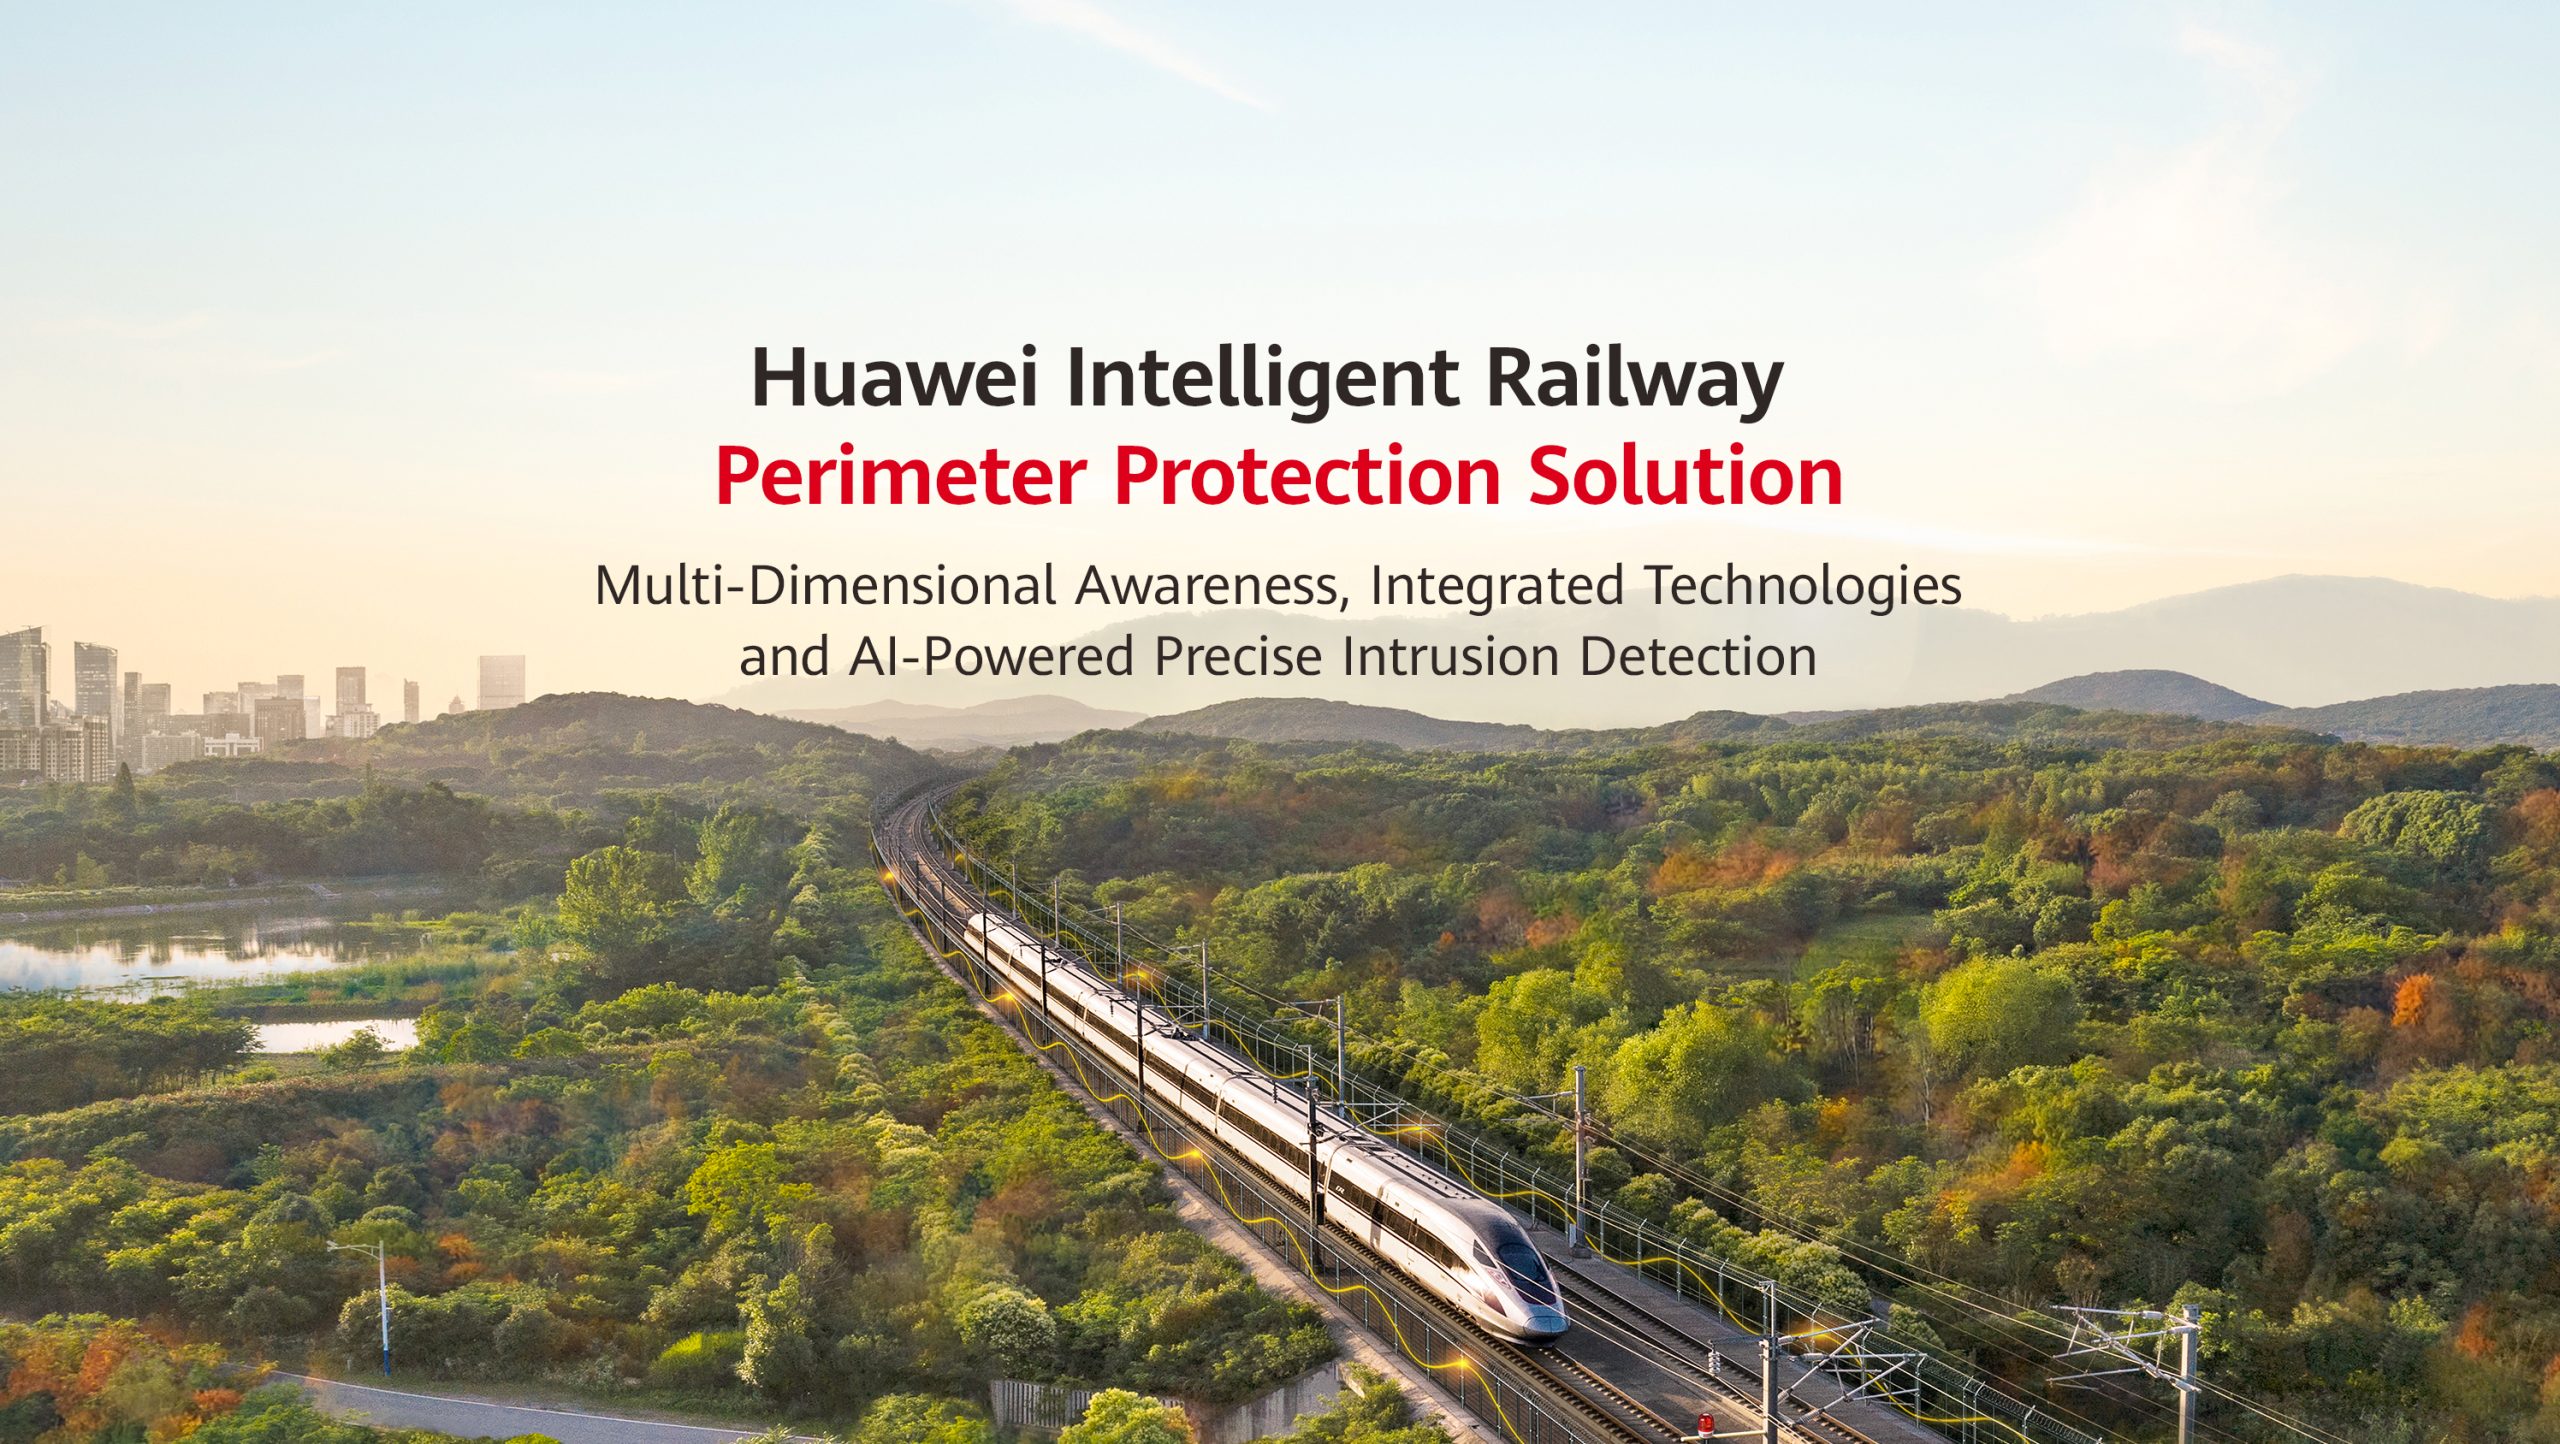 https://www.globalrailwayreview.com/wp-content/uploads/Huawei-Article-scaled.jpg